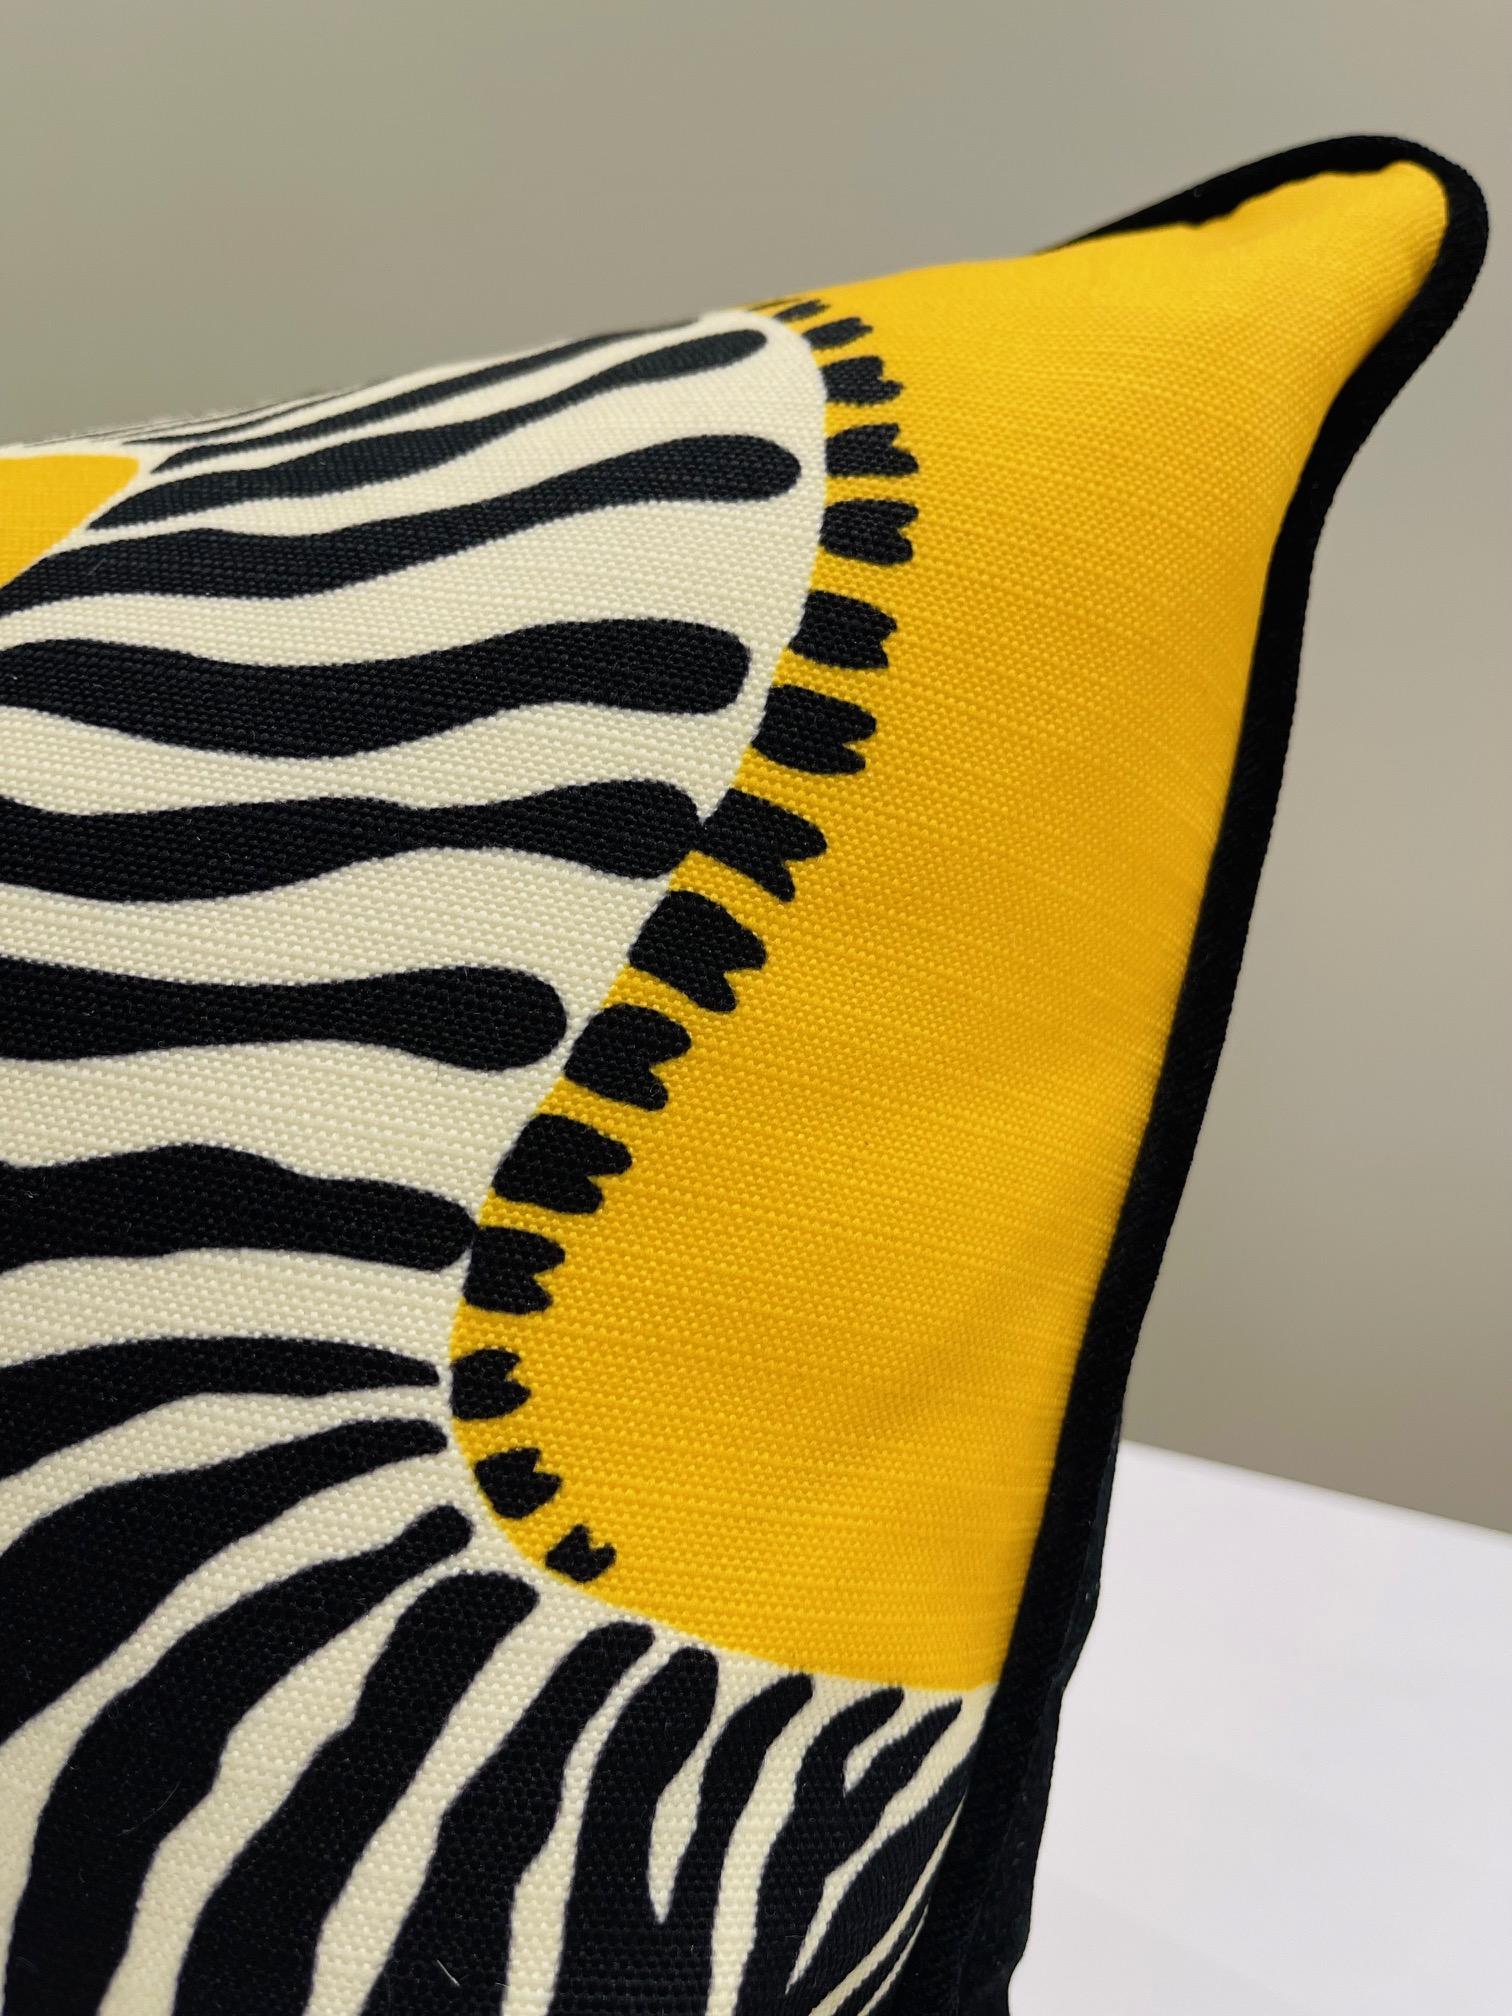 This luxury plush pillow is a product of the Art by Gomez atelier. The front is fitted with a rich sunflower yellow that supports a pattern with galloping zebras. The fabric is from the archives of the luxurious House of Scalamandre. The back is a